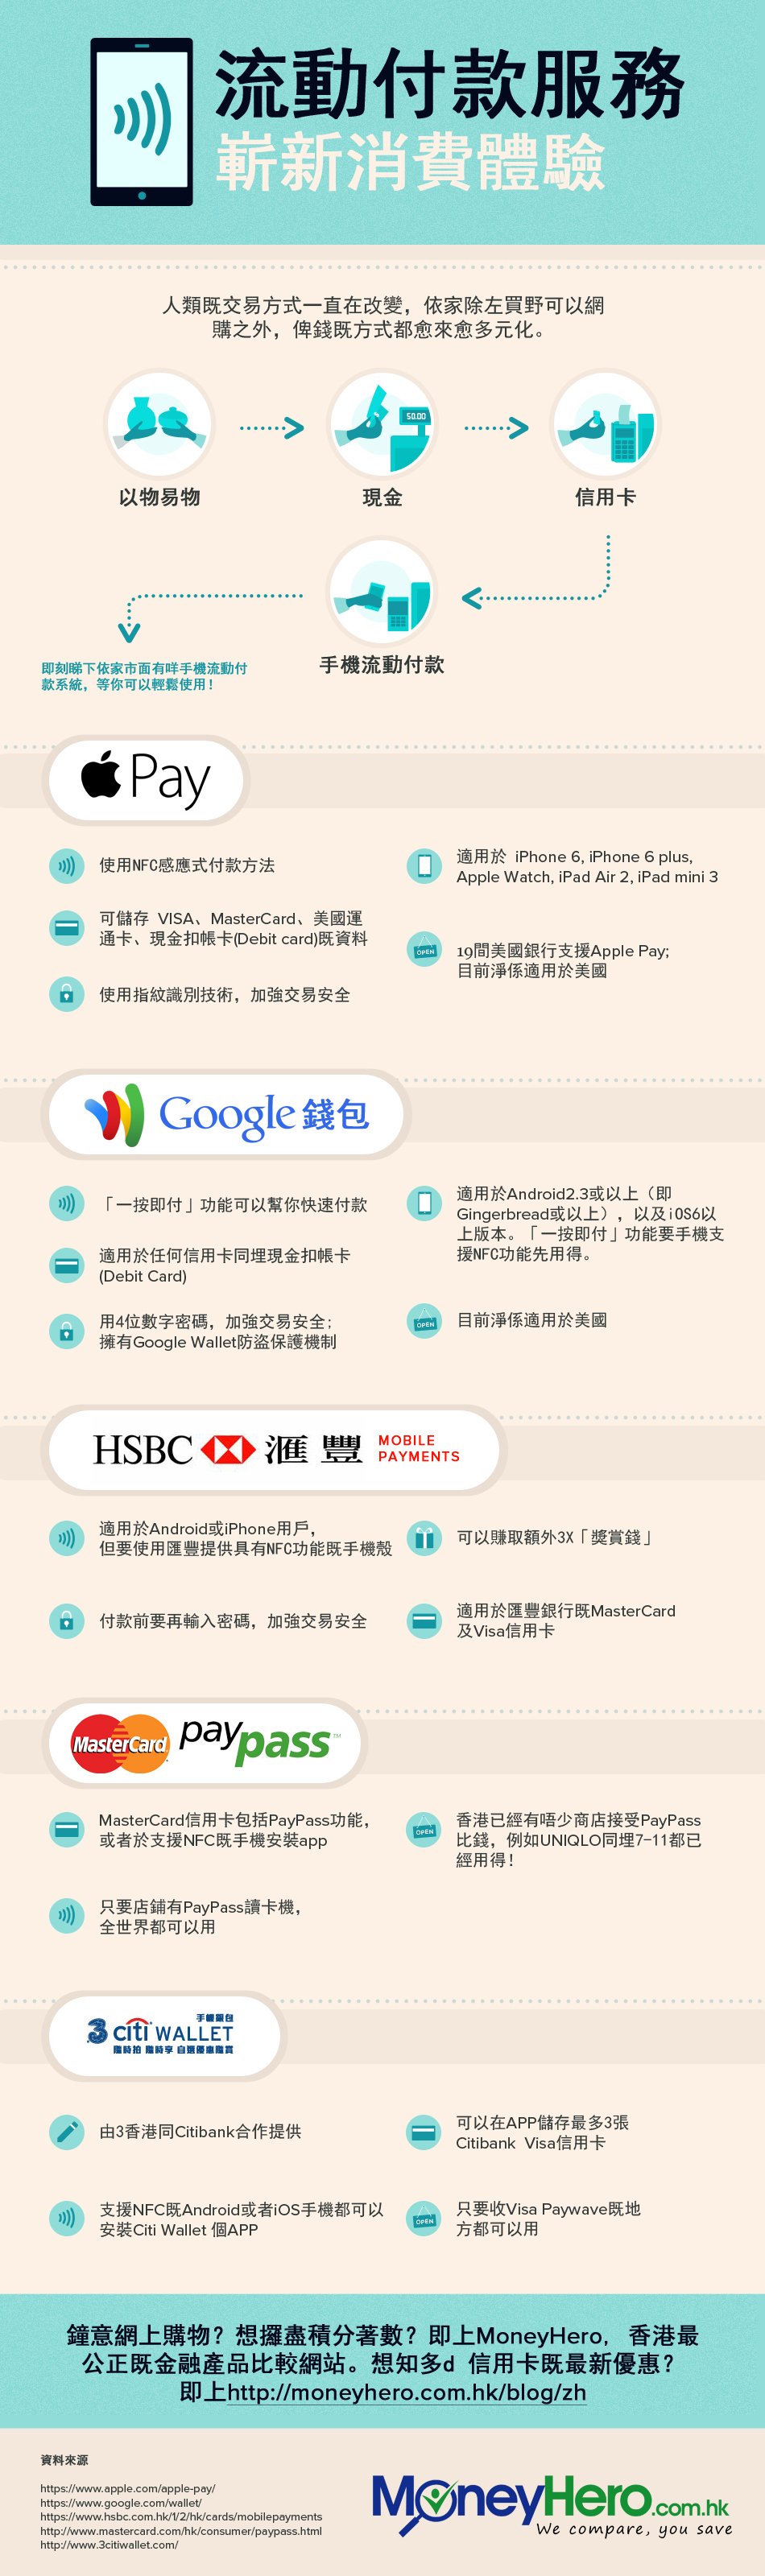 HK IG Mobile Payments - ZH